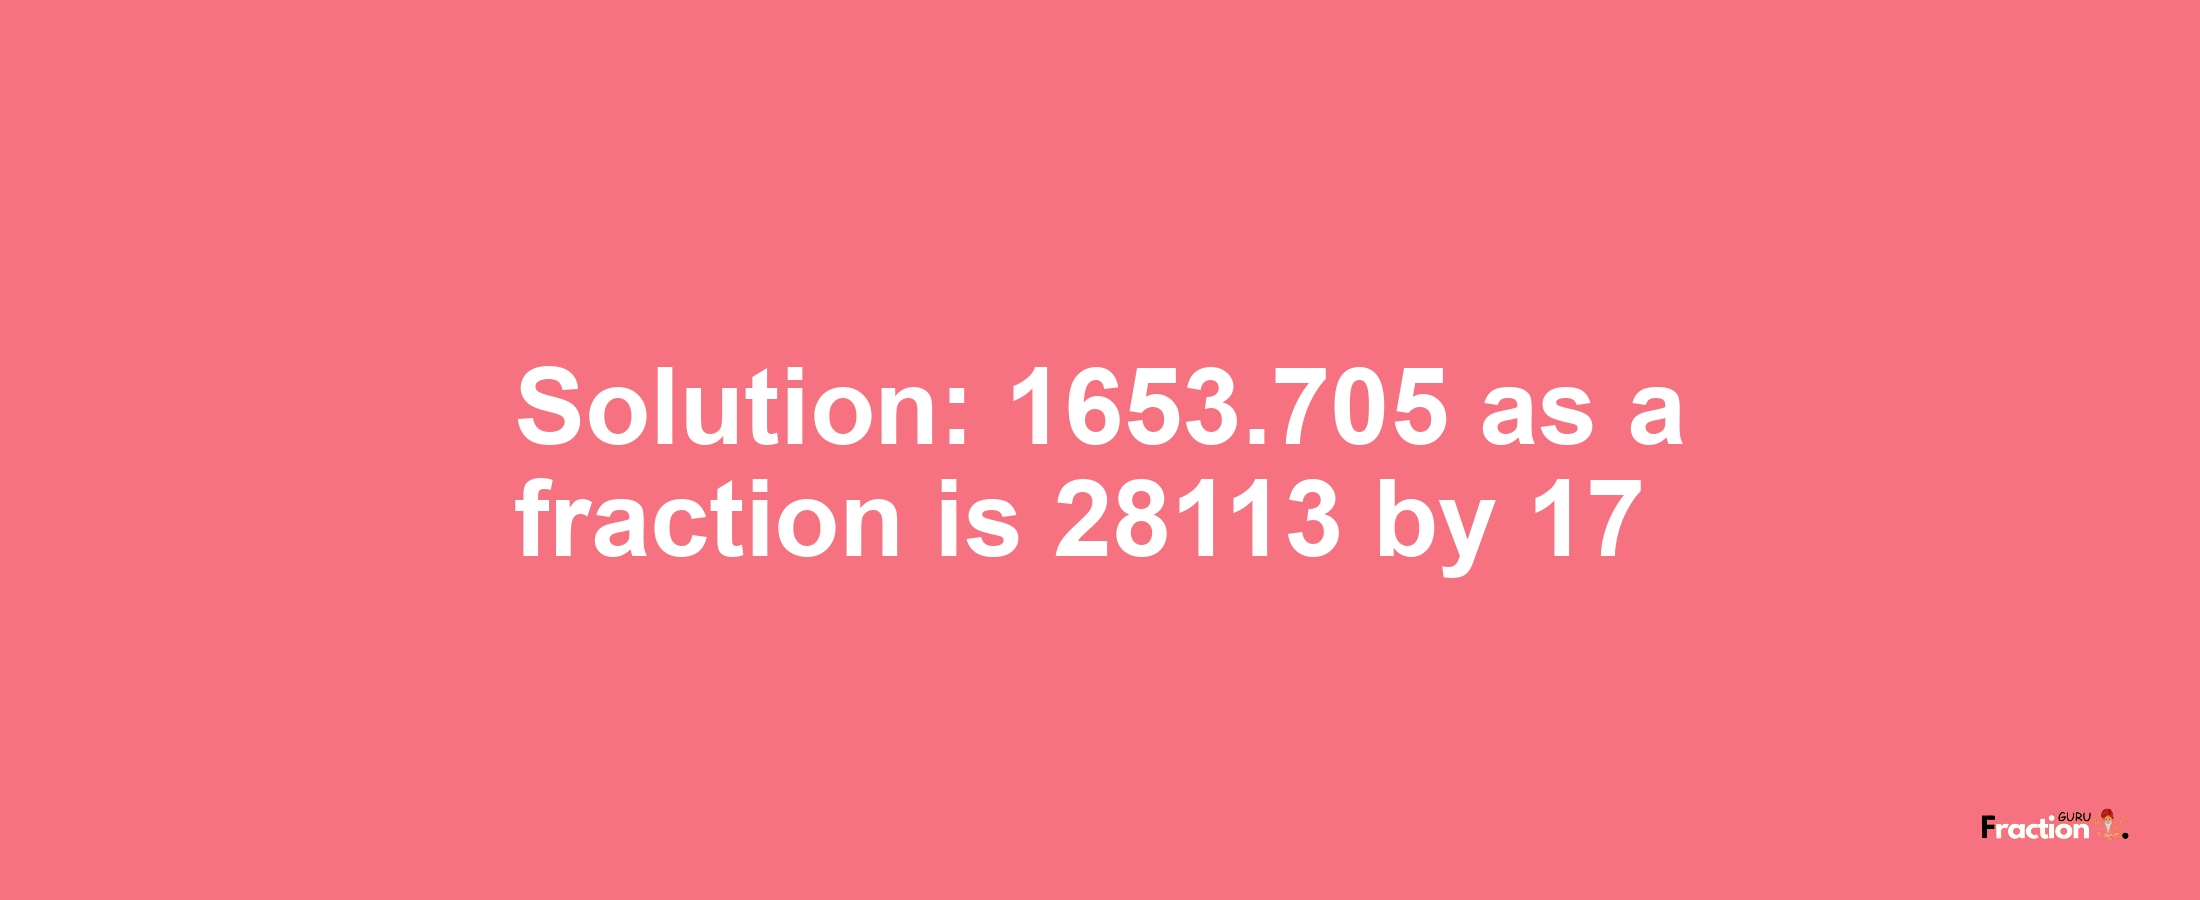 Solution:1653.705 as a fraction is 28113/17